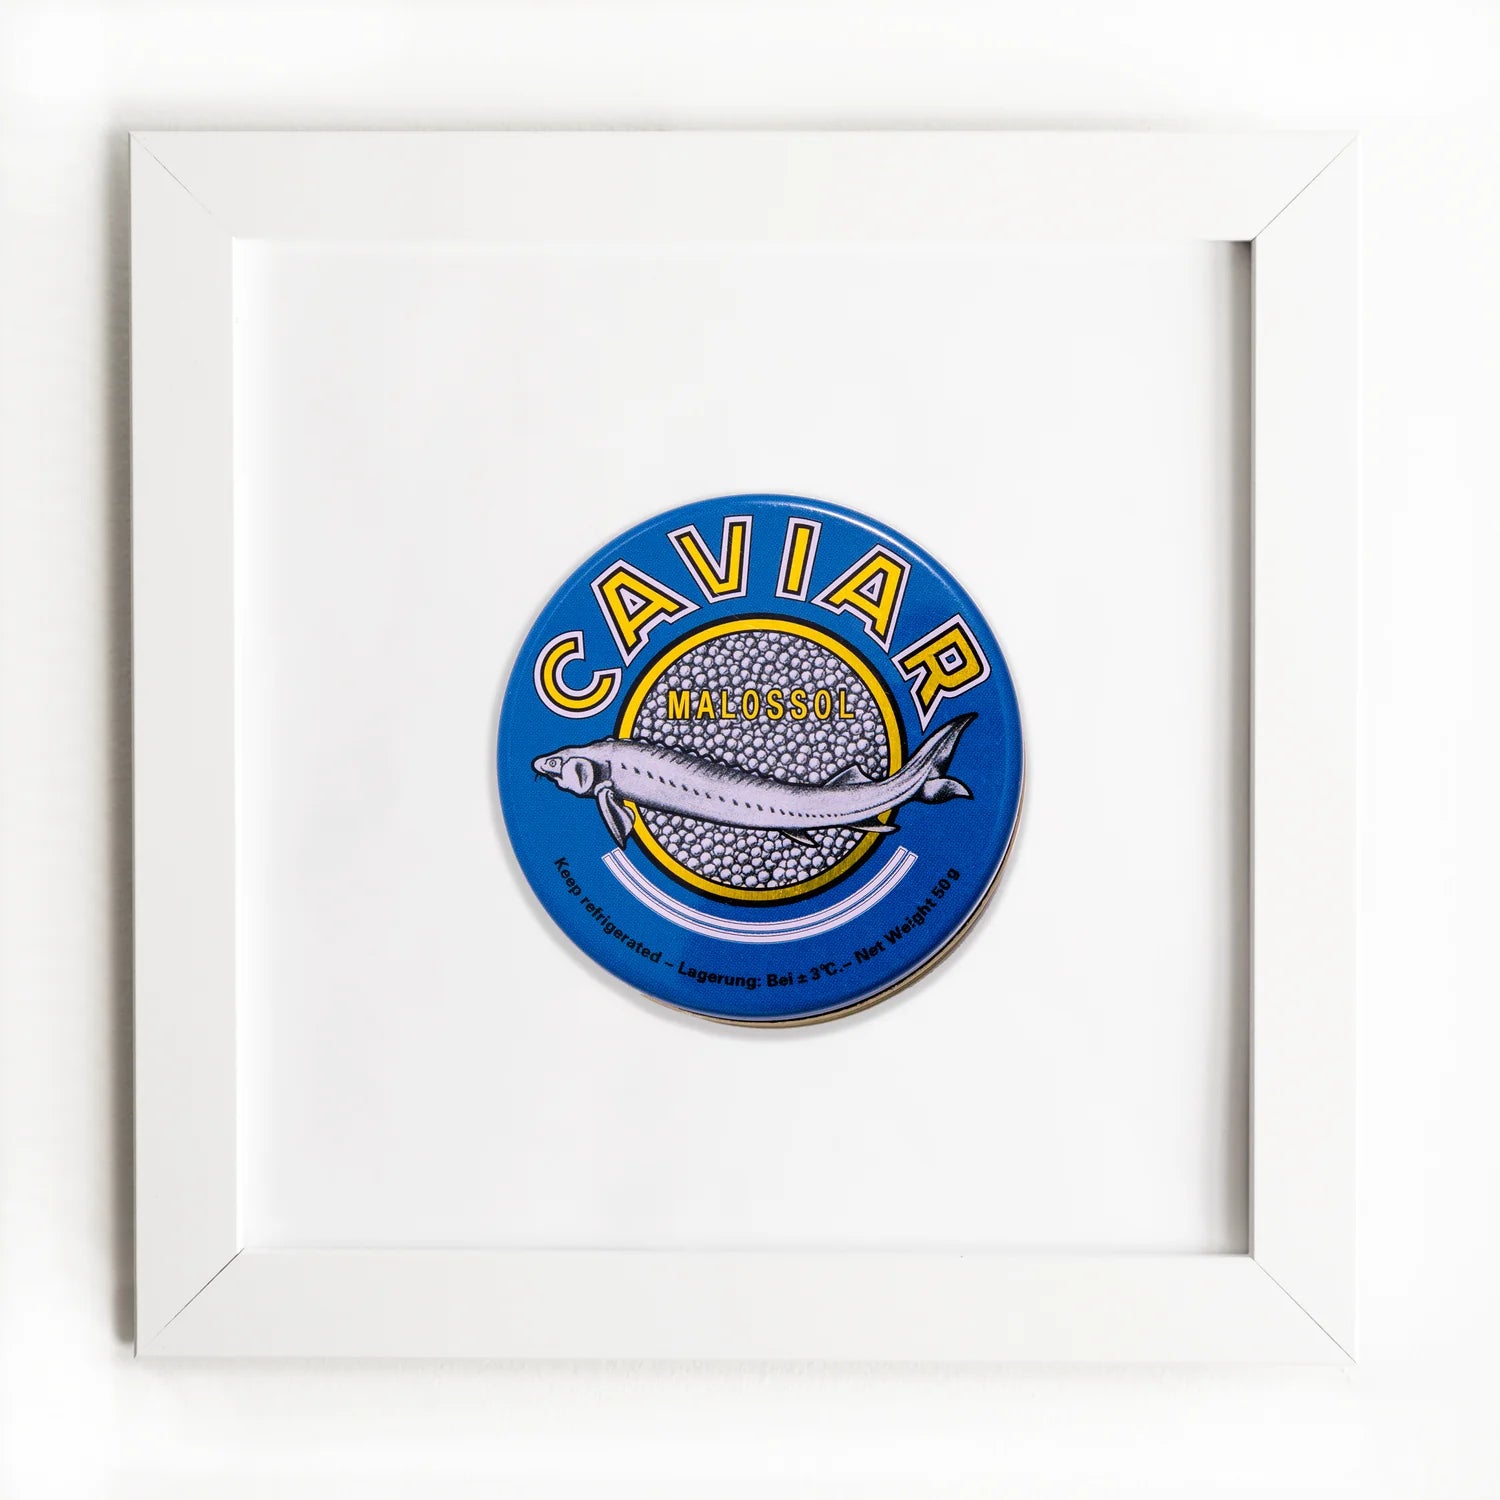 A framed graphic of a caviar tin label, featuring a blue and yellow design with an illustration of a sturgeon and the text "Caviar Malossol" on it, displayed against a white Match South Art Square White Frame background.